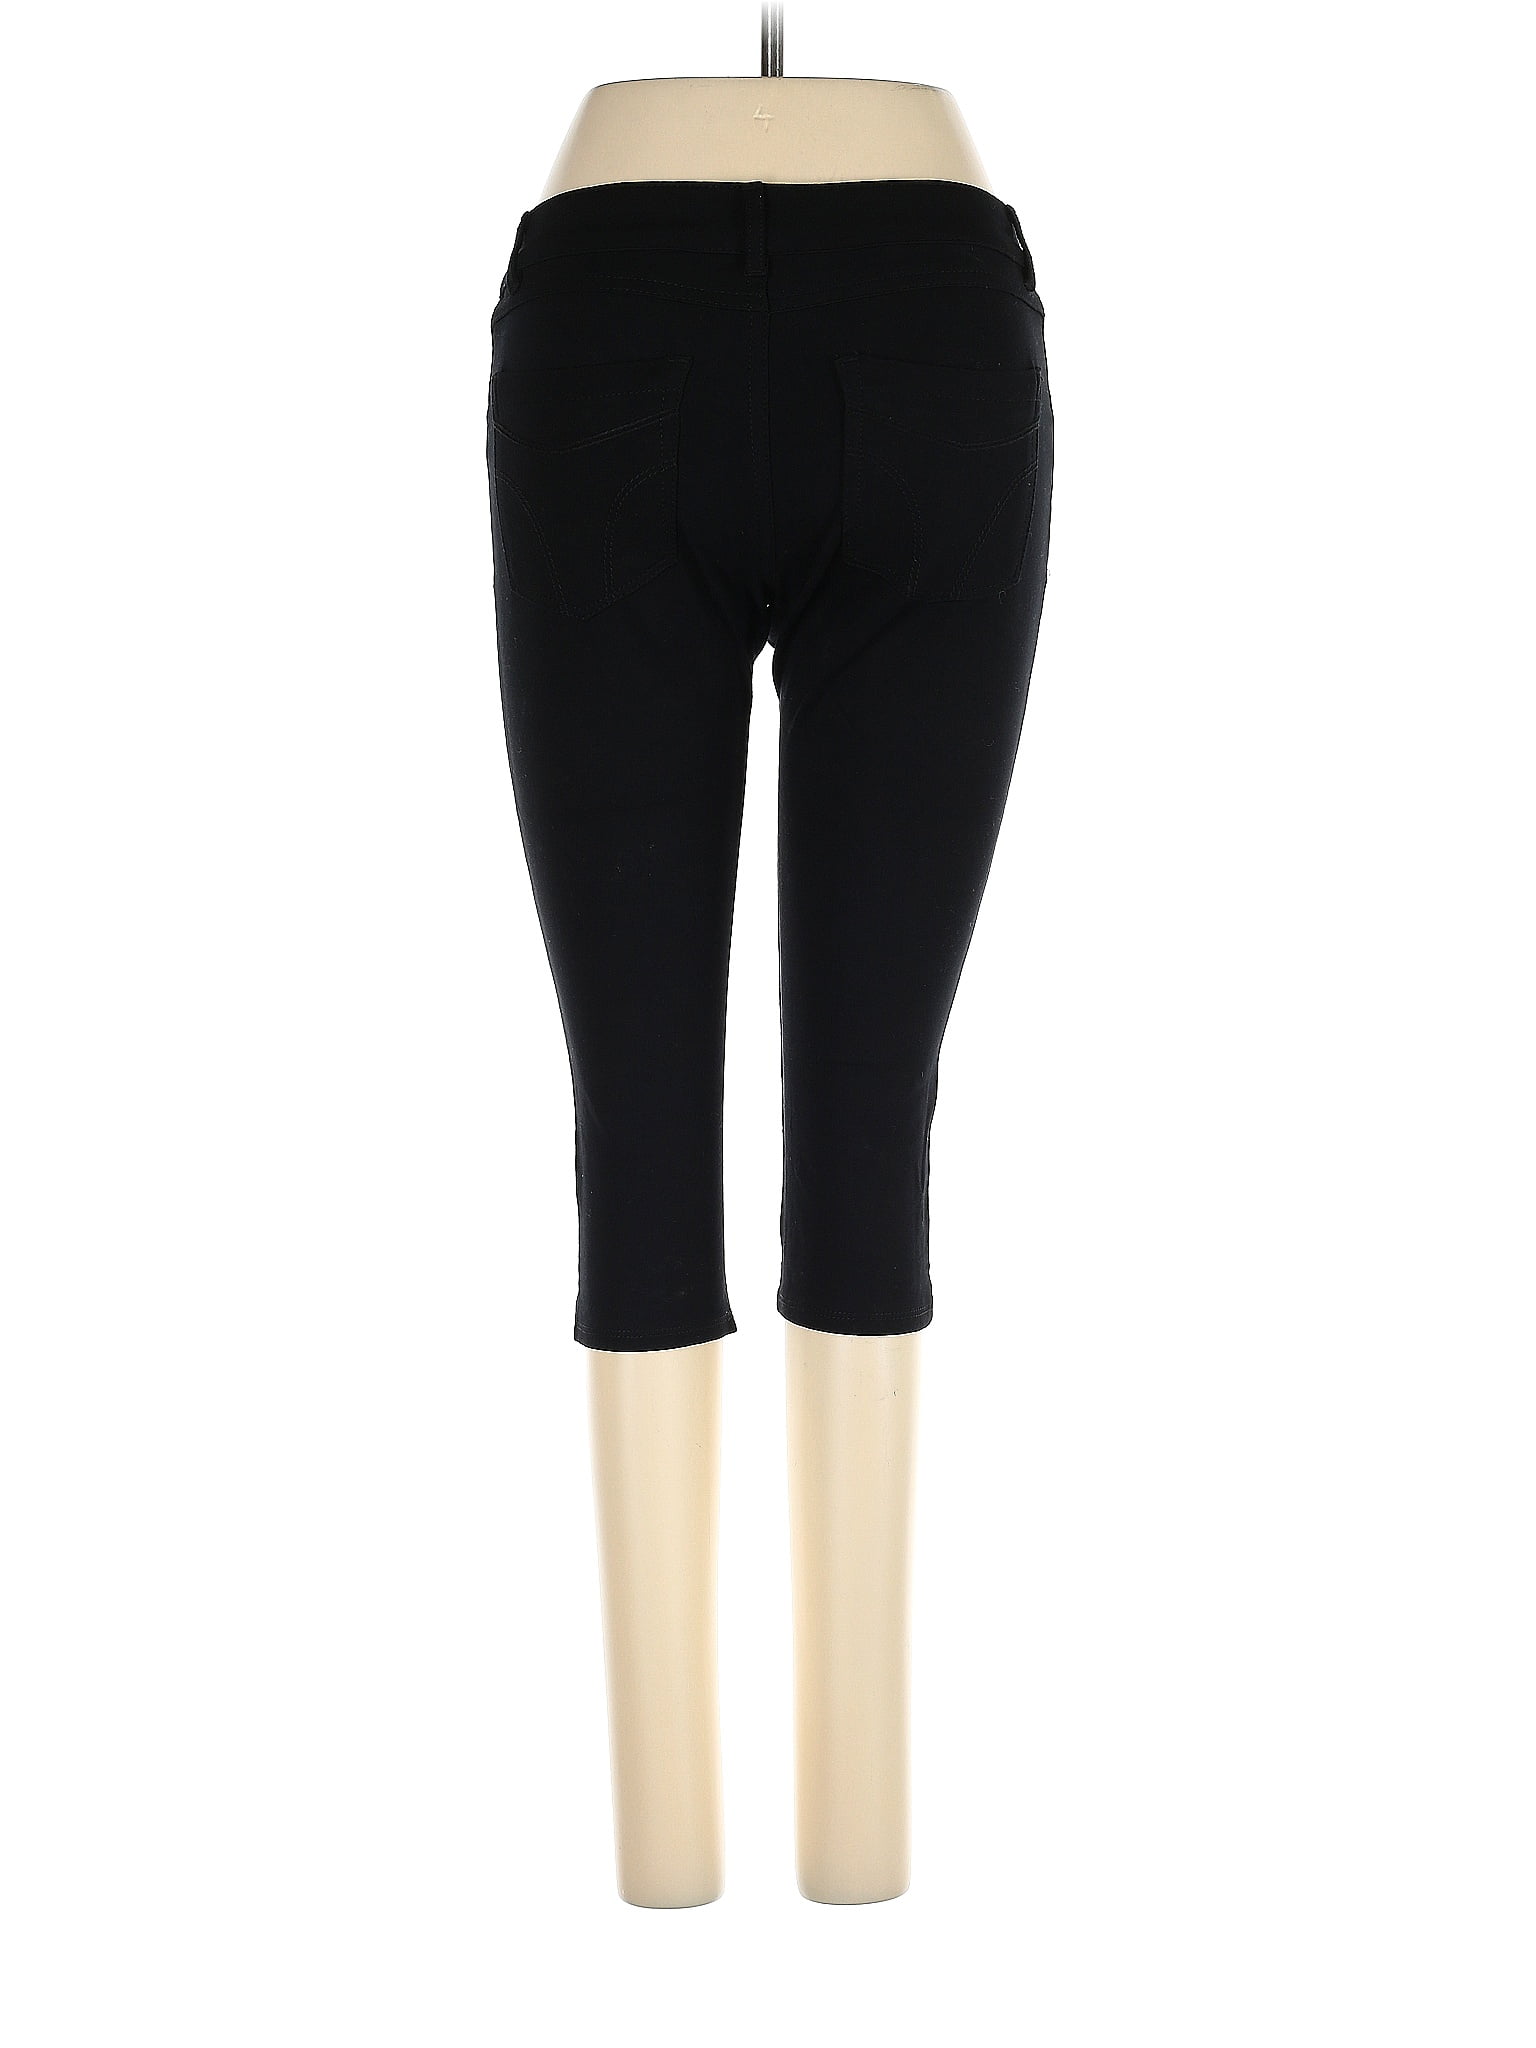 Aerie Solid Black Leggings Size XL - 44% off